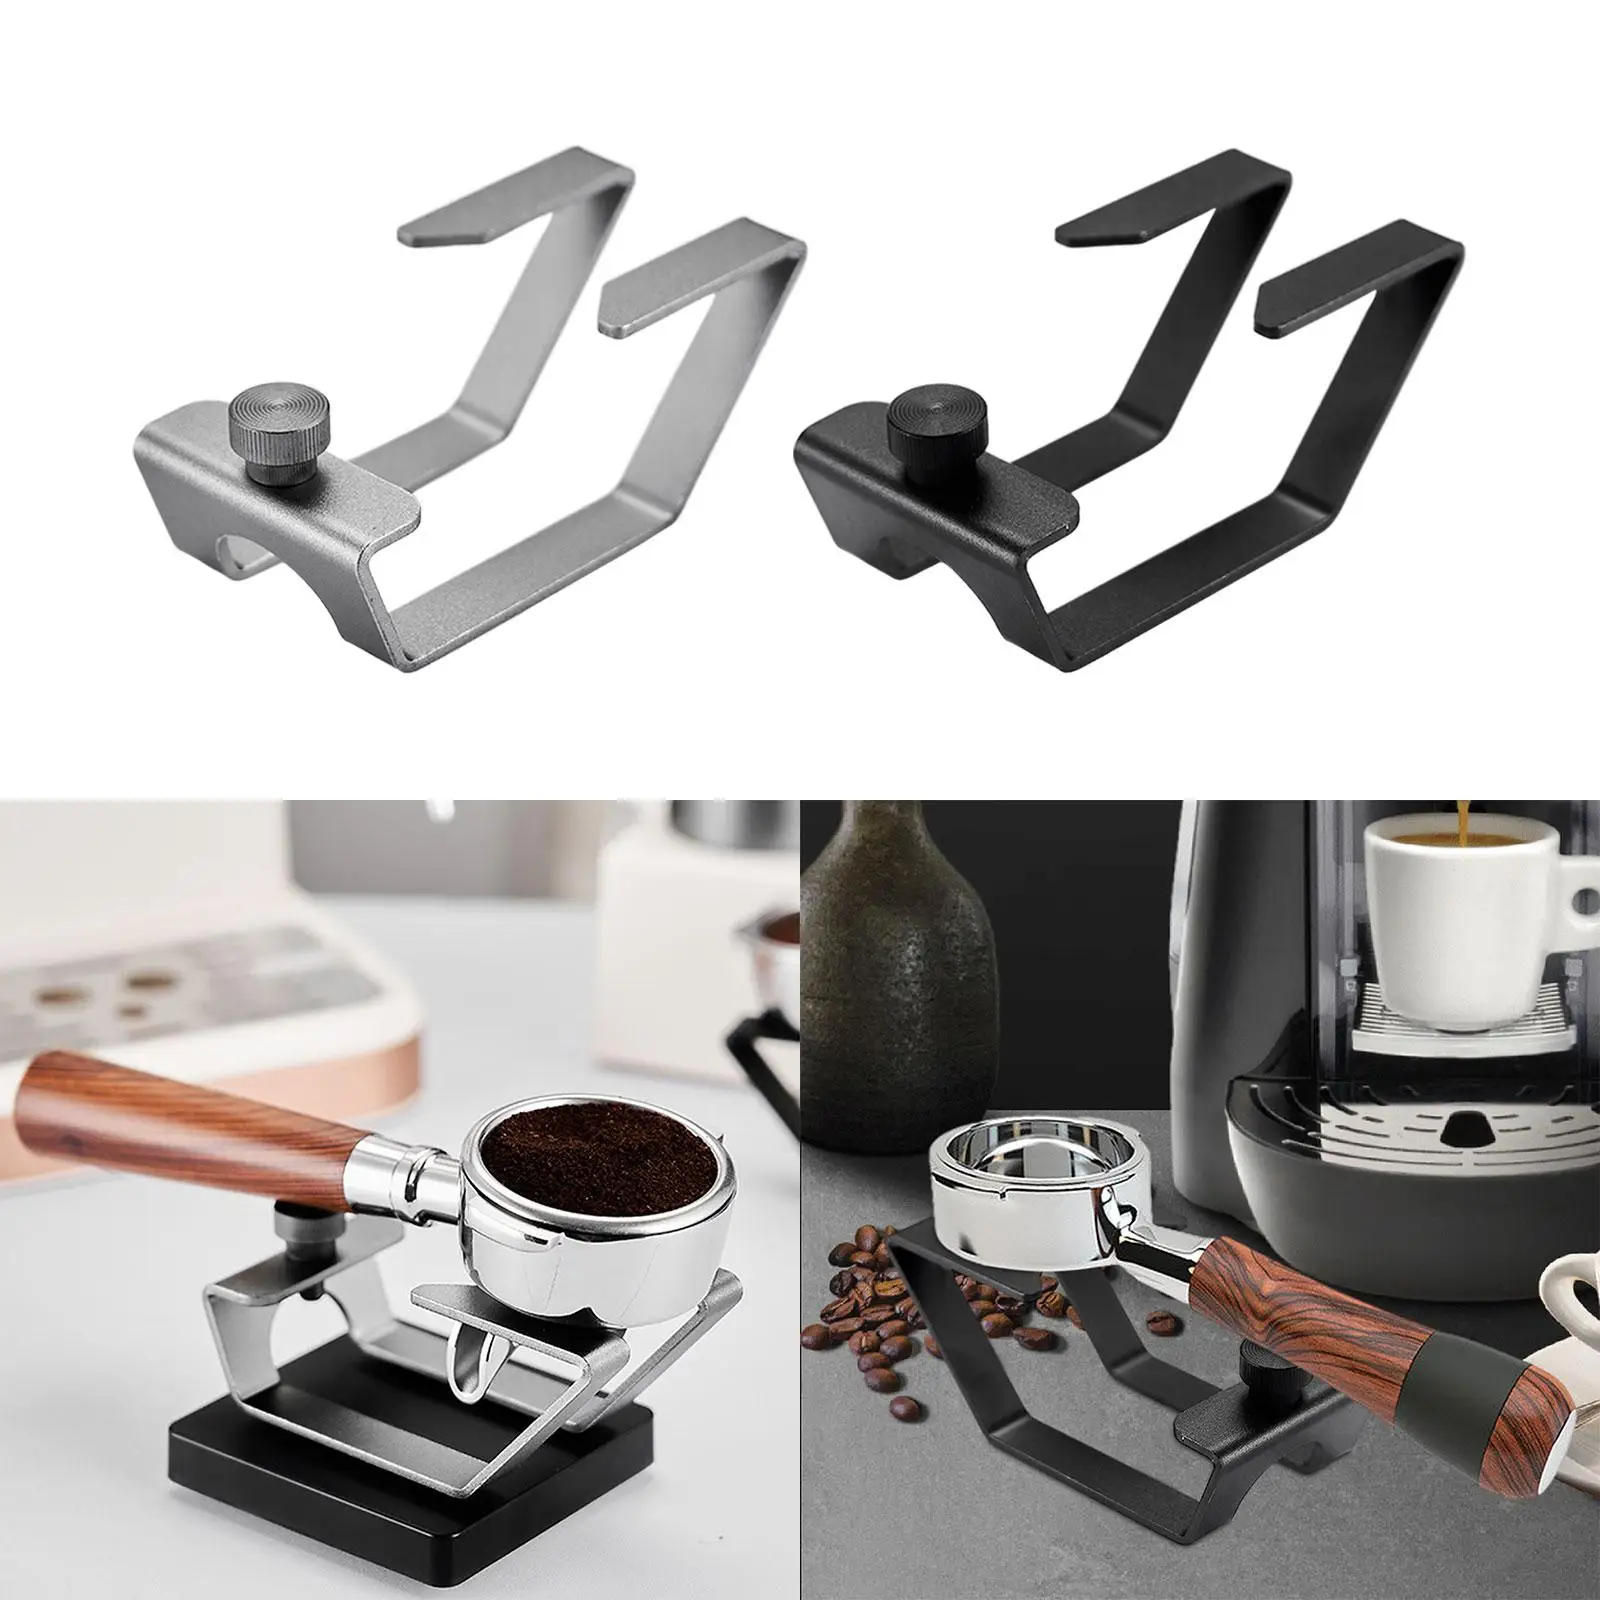 Coffee Tamper Stand Aluminum Espresso Holder Weighing Rack for Espresso Machines Portafilter Single Spout Double Spout Accessory